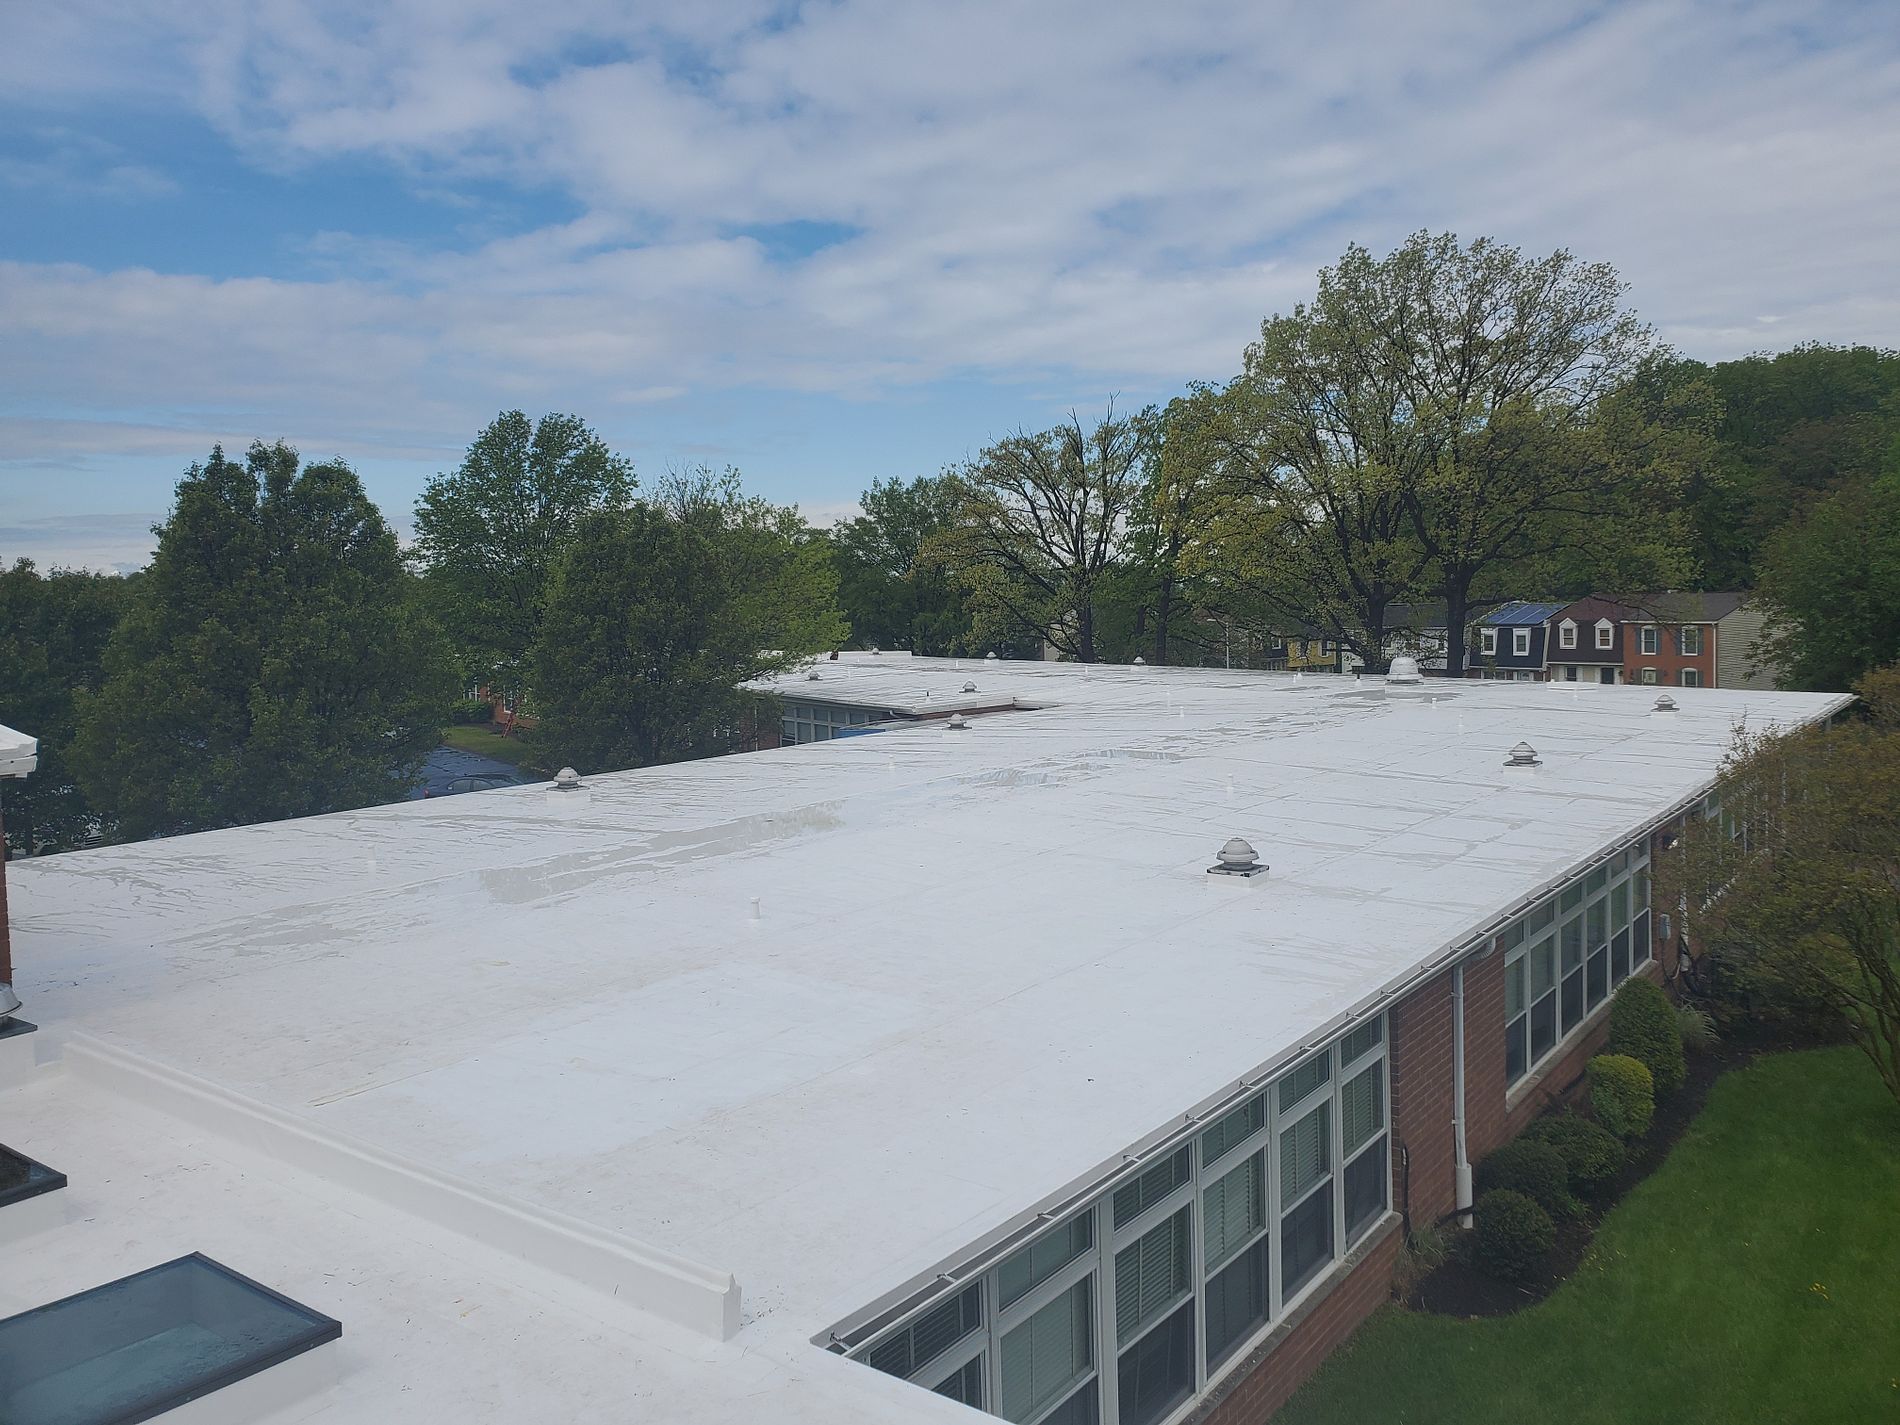 Professional roofers applying a roof coating in Gaithersburg's commercial building